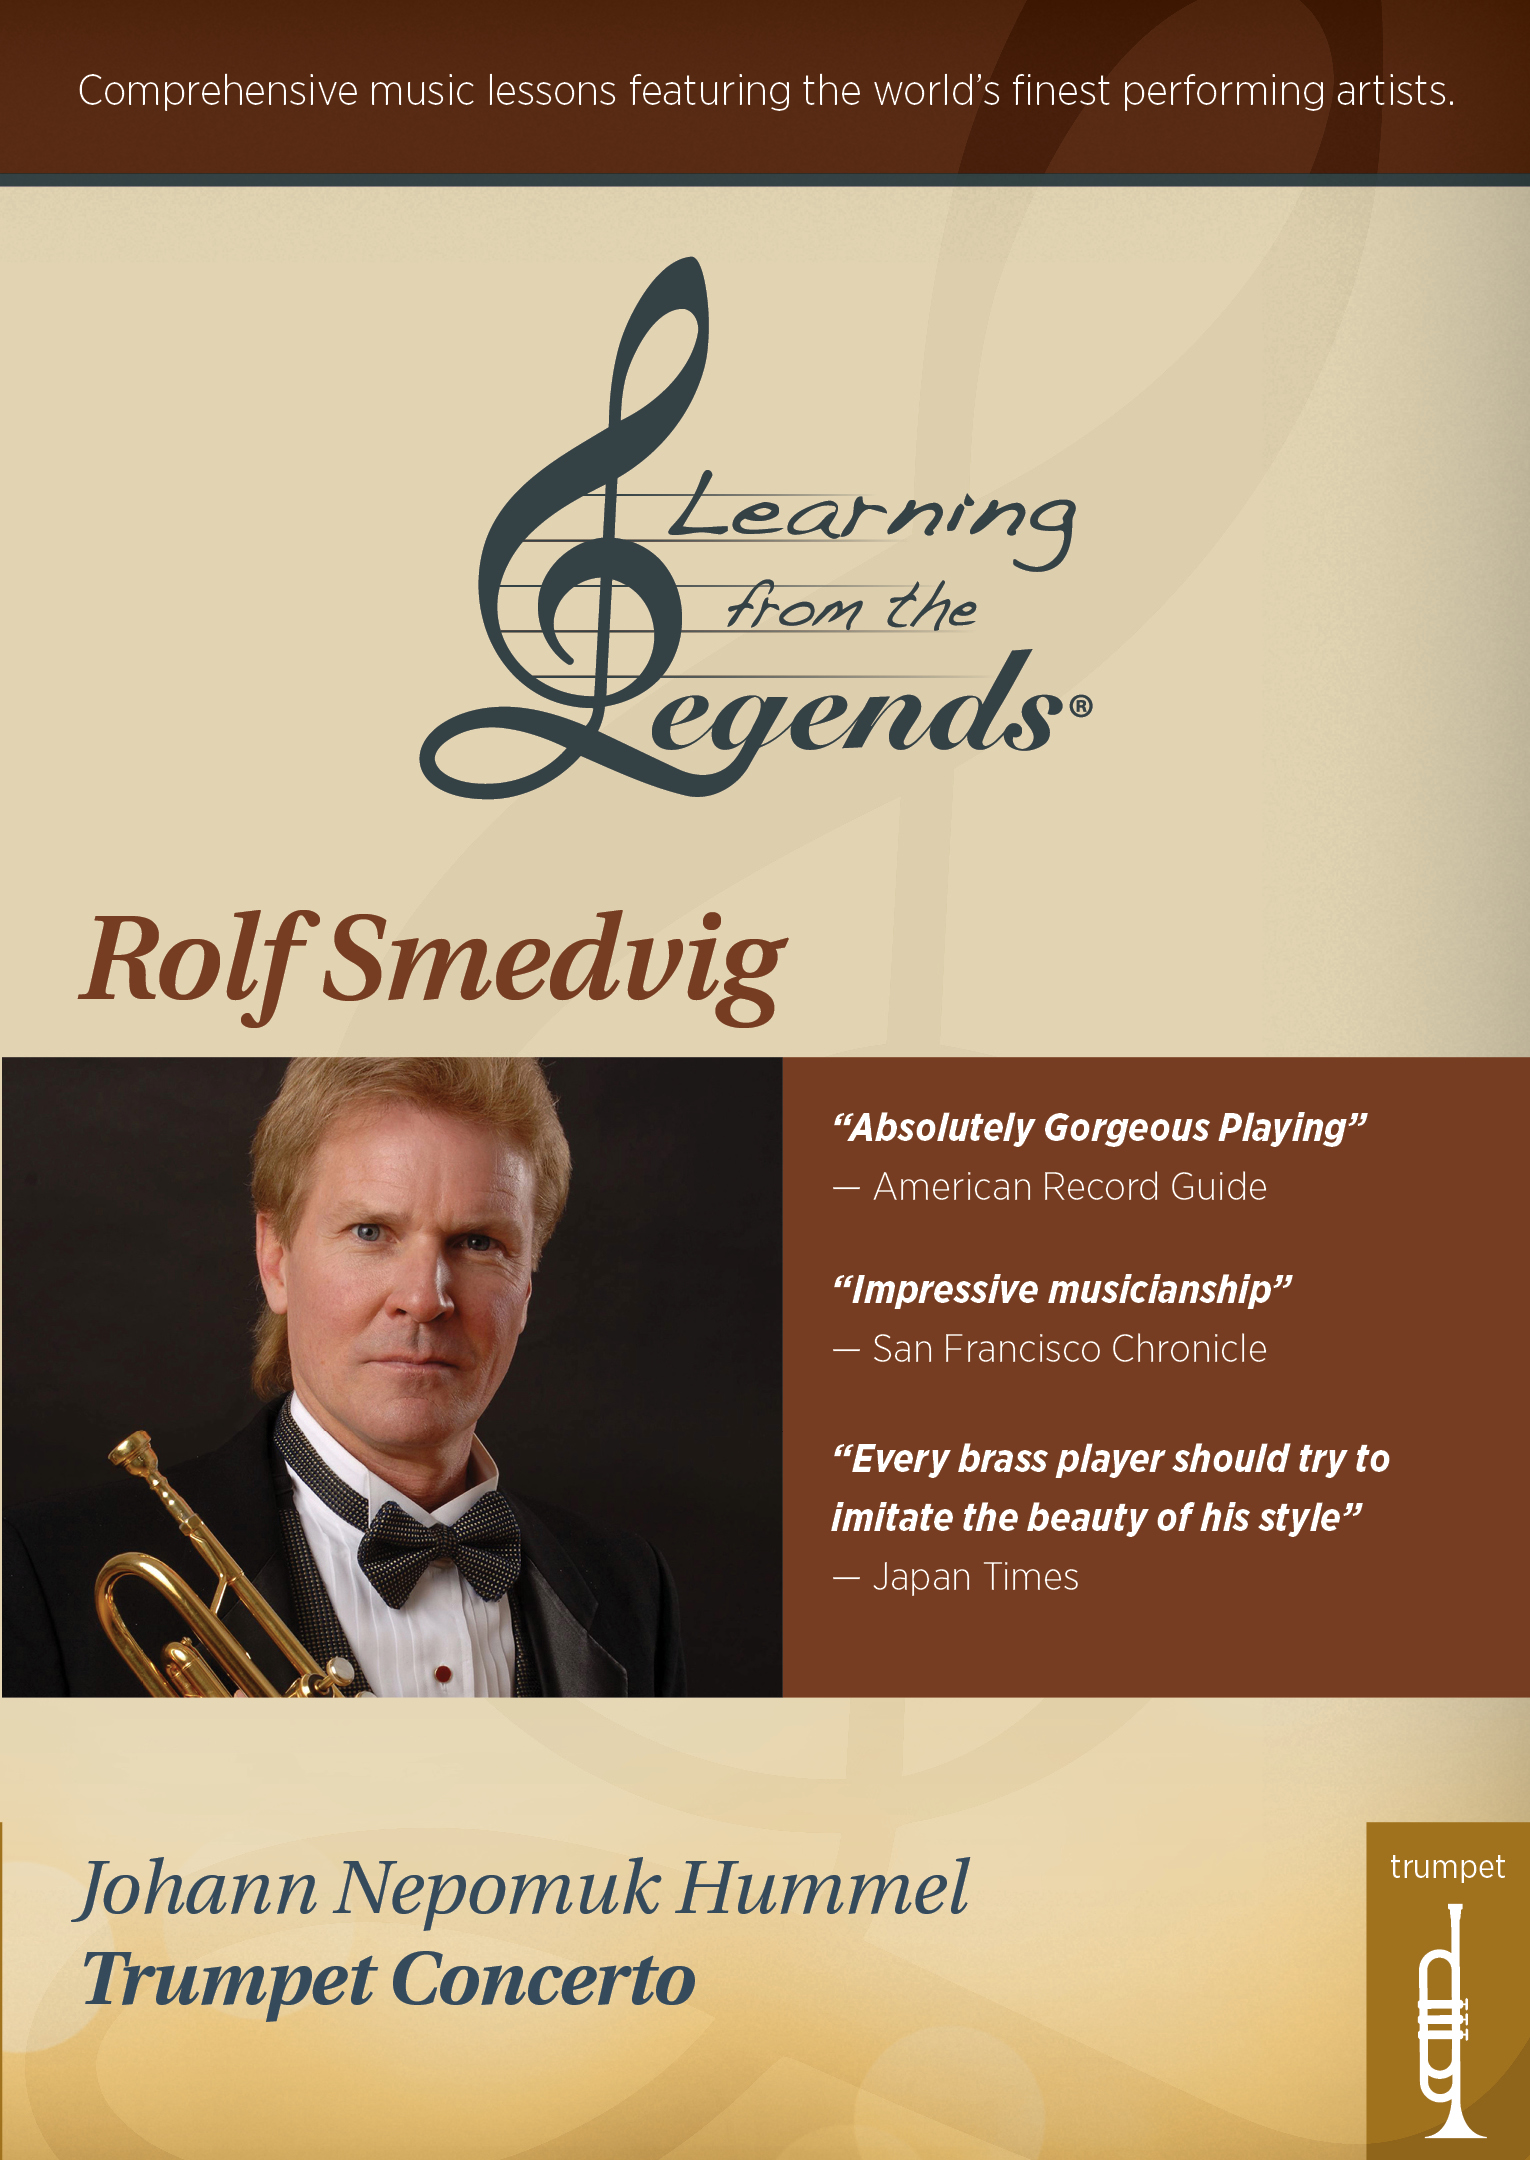 Learning from the Legends: Hummel Trumpet Concerto featuring Rolf Smedvig